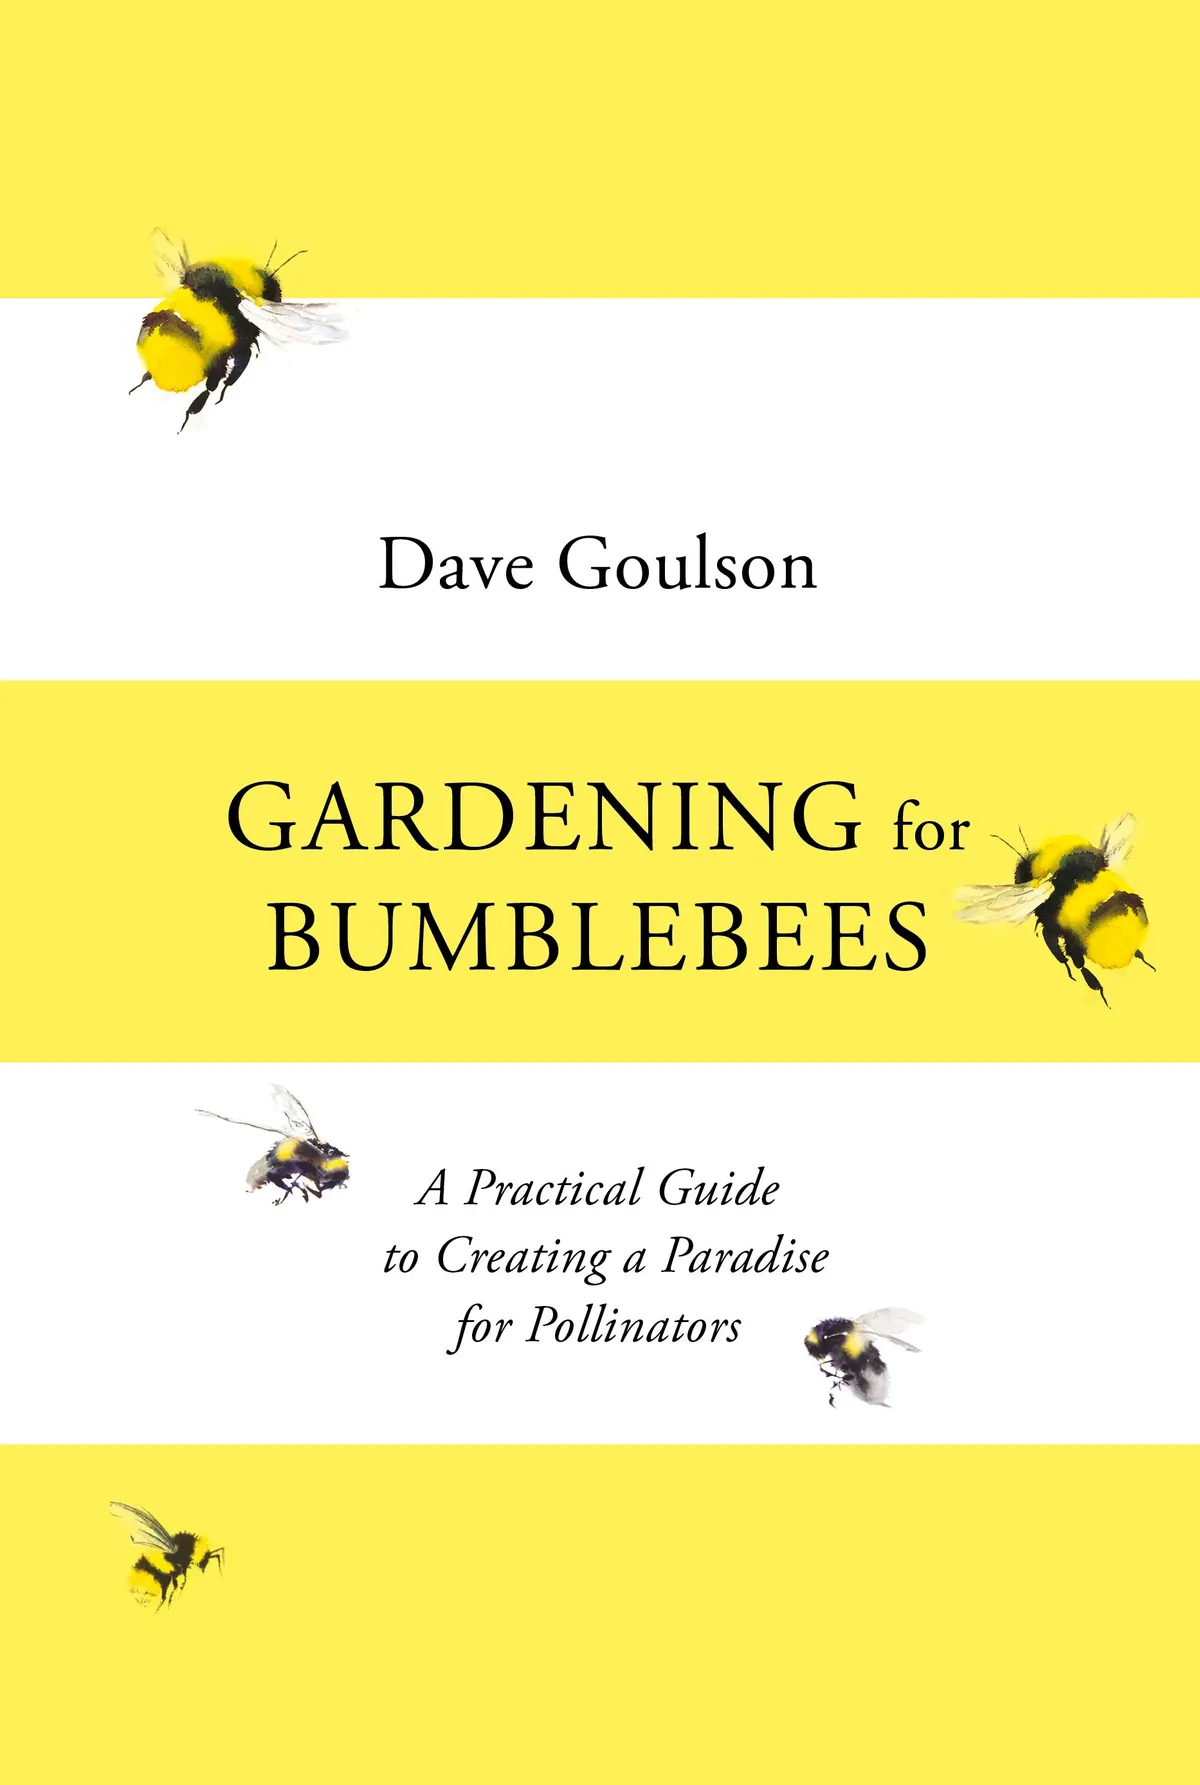 Gardening for Bumblebees book cover